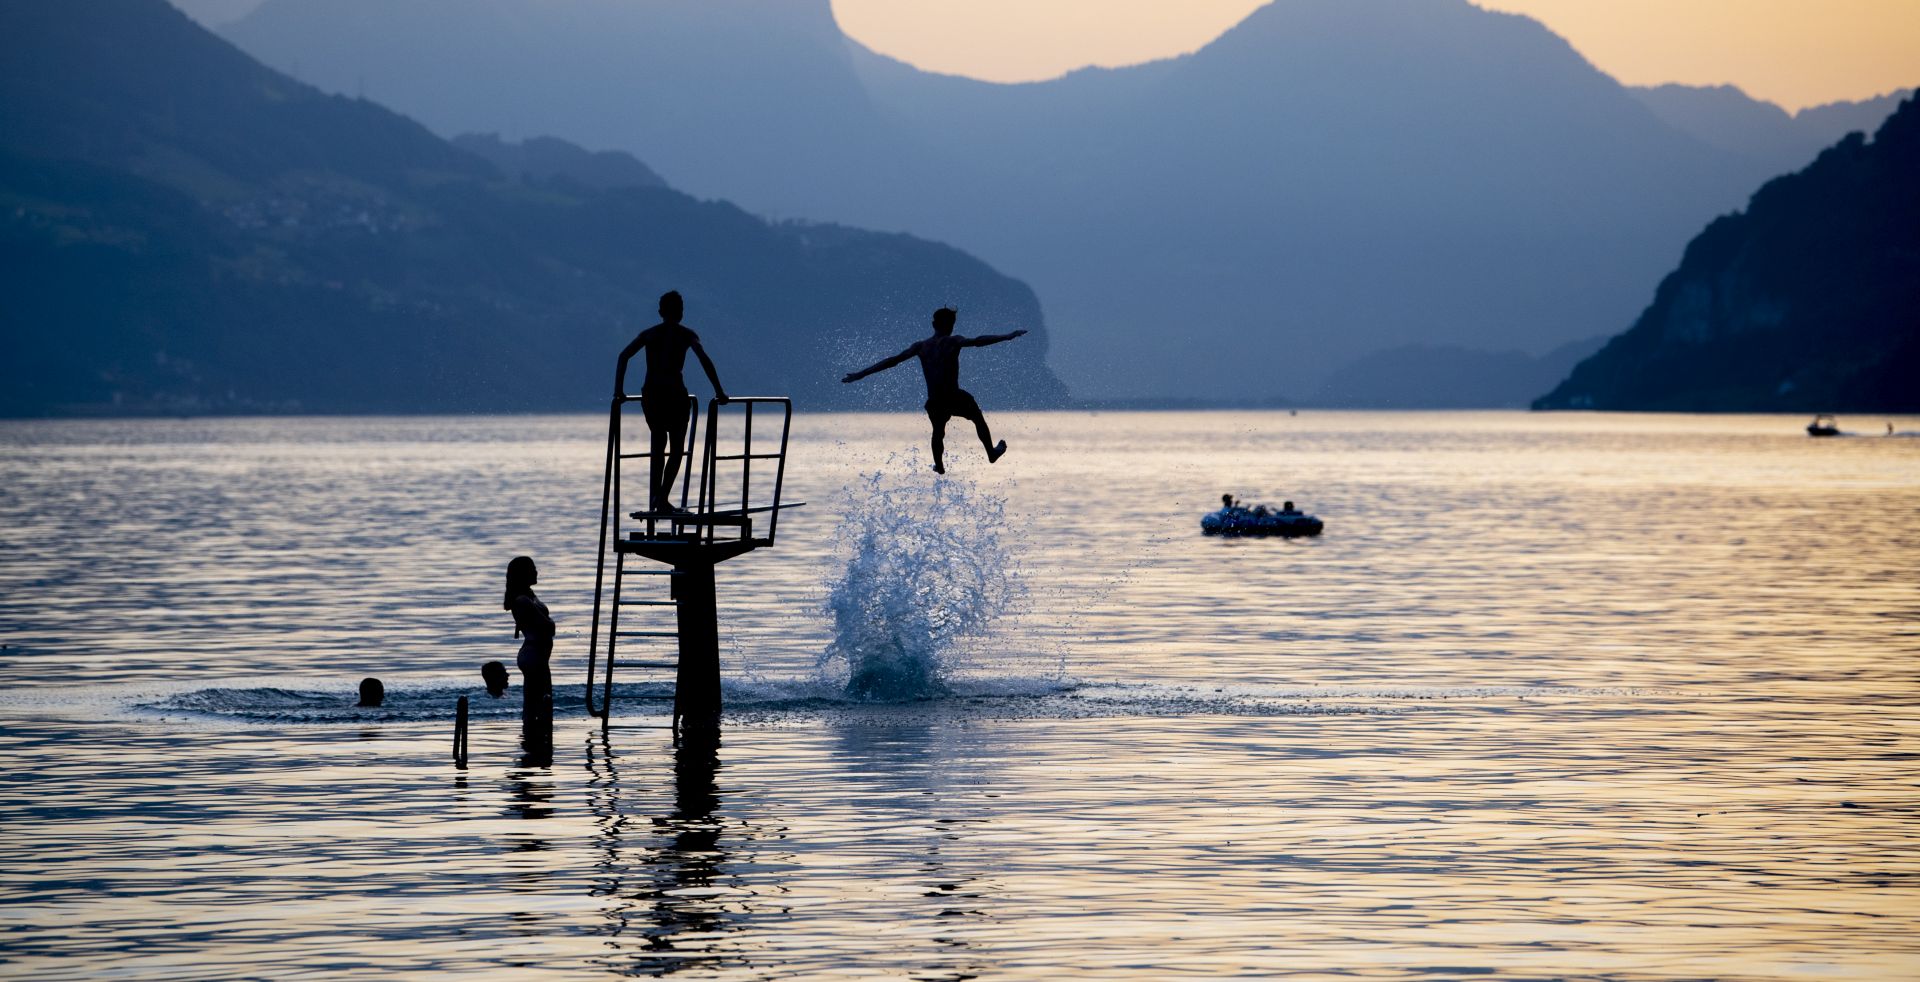 epa07673827 Youth enjoy the evening on lake Walensee in Walenstadt, Switzerland, 25 June 2019 (issued 26 June 2019). The country was hit by a heatwave with temperatures up to 39 degrees Celsius.  EPA/GIAN EHRENZELLER